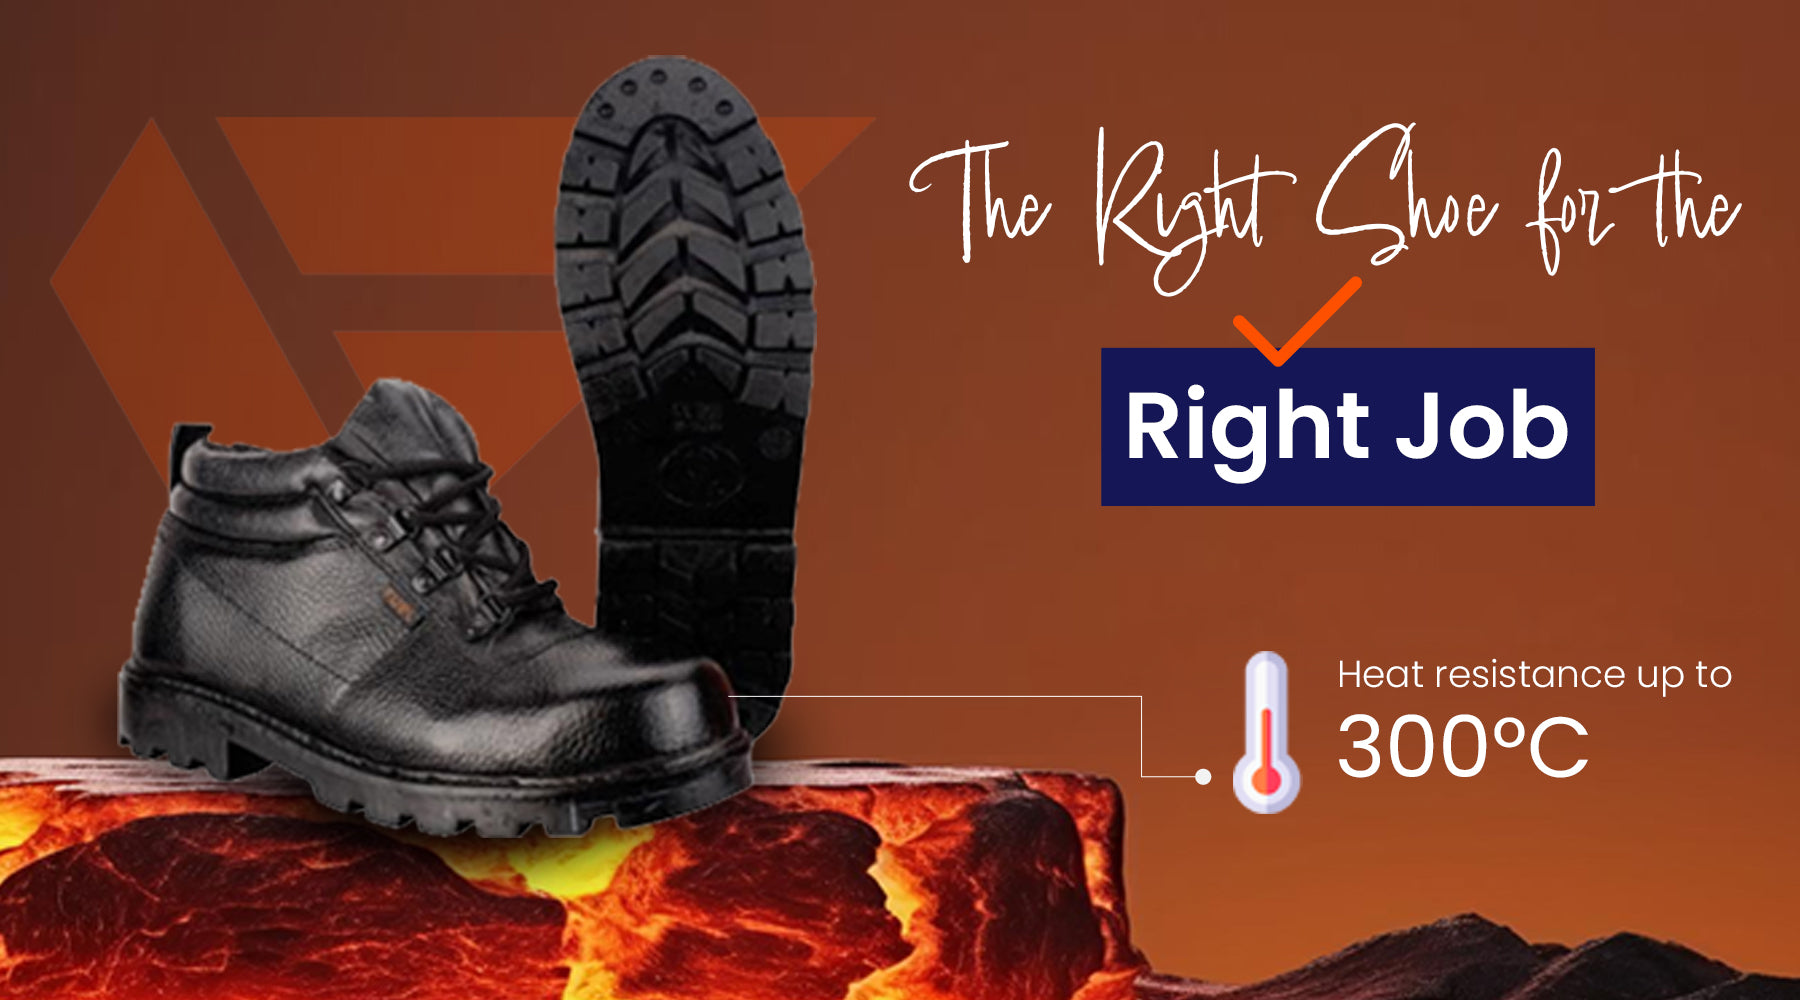 The Right Shoe for the Right Job